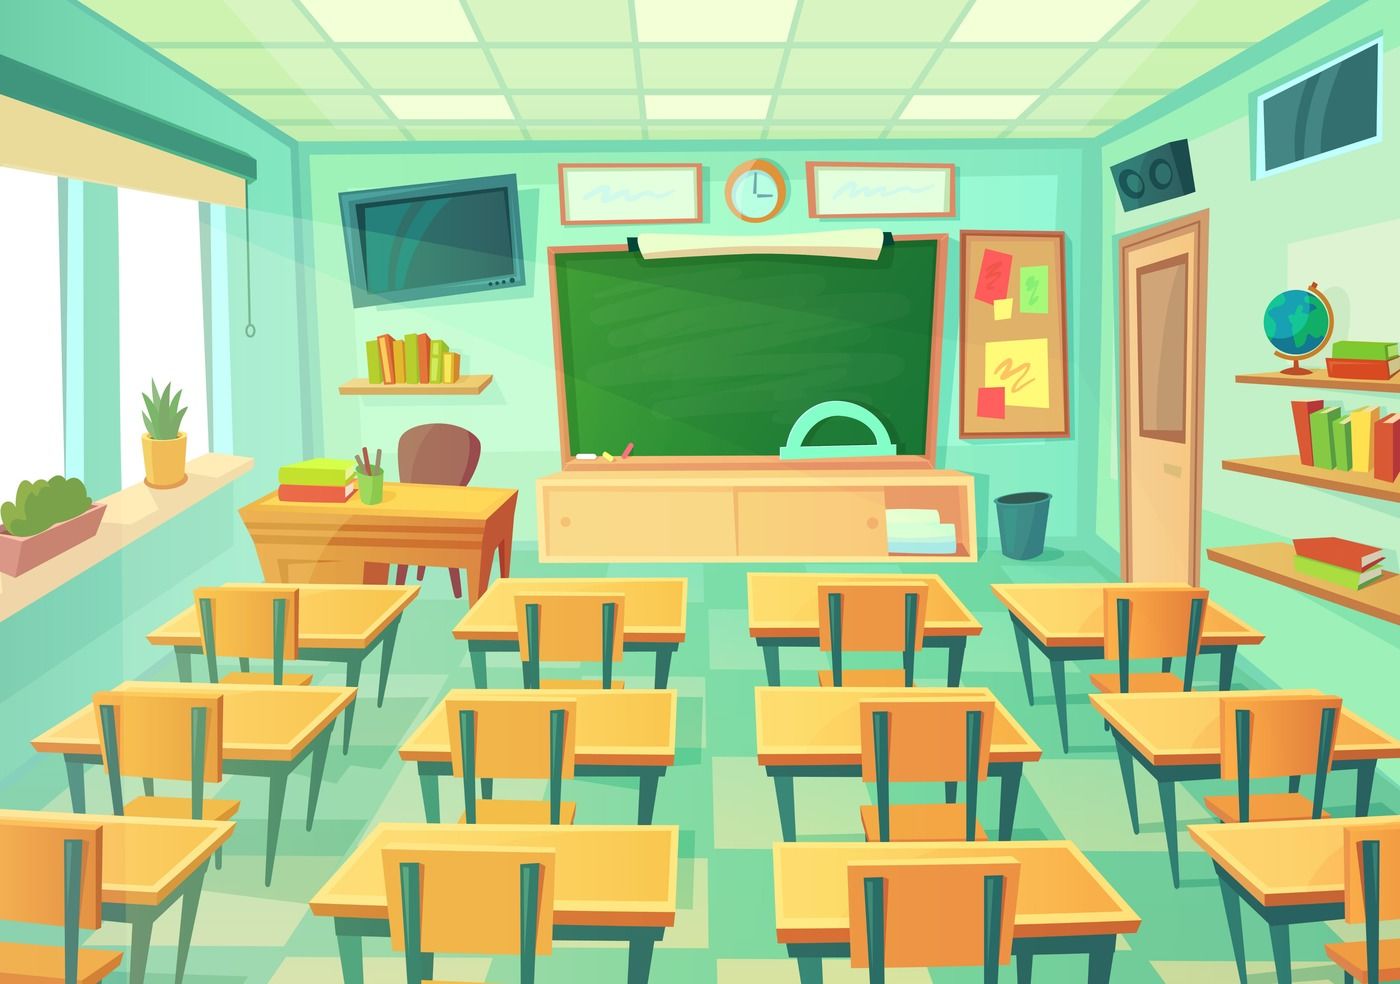 Typical anime classroom, chalkboard, empty, quiet